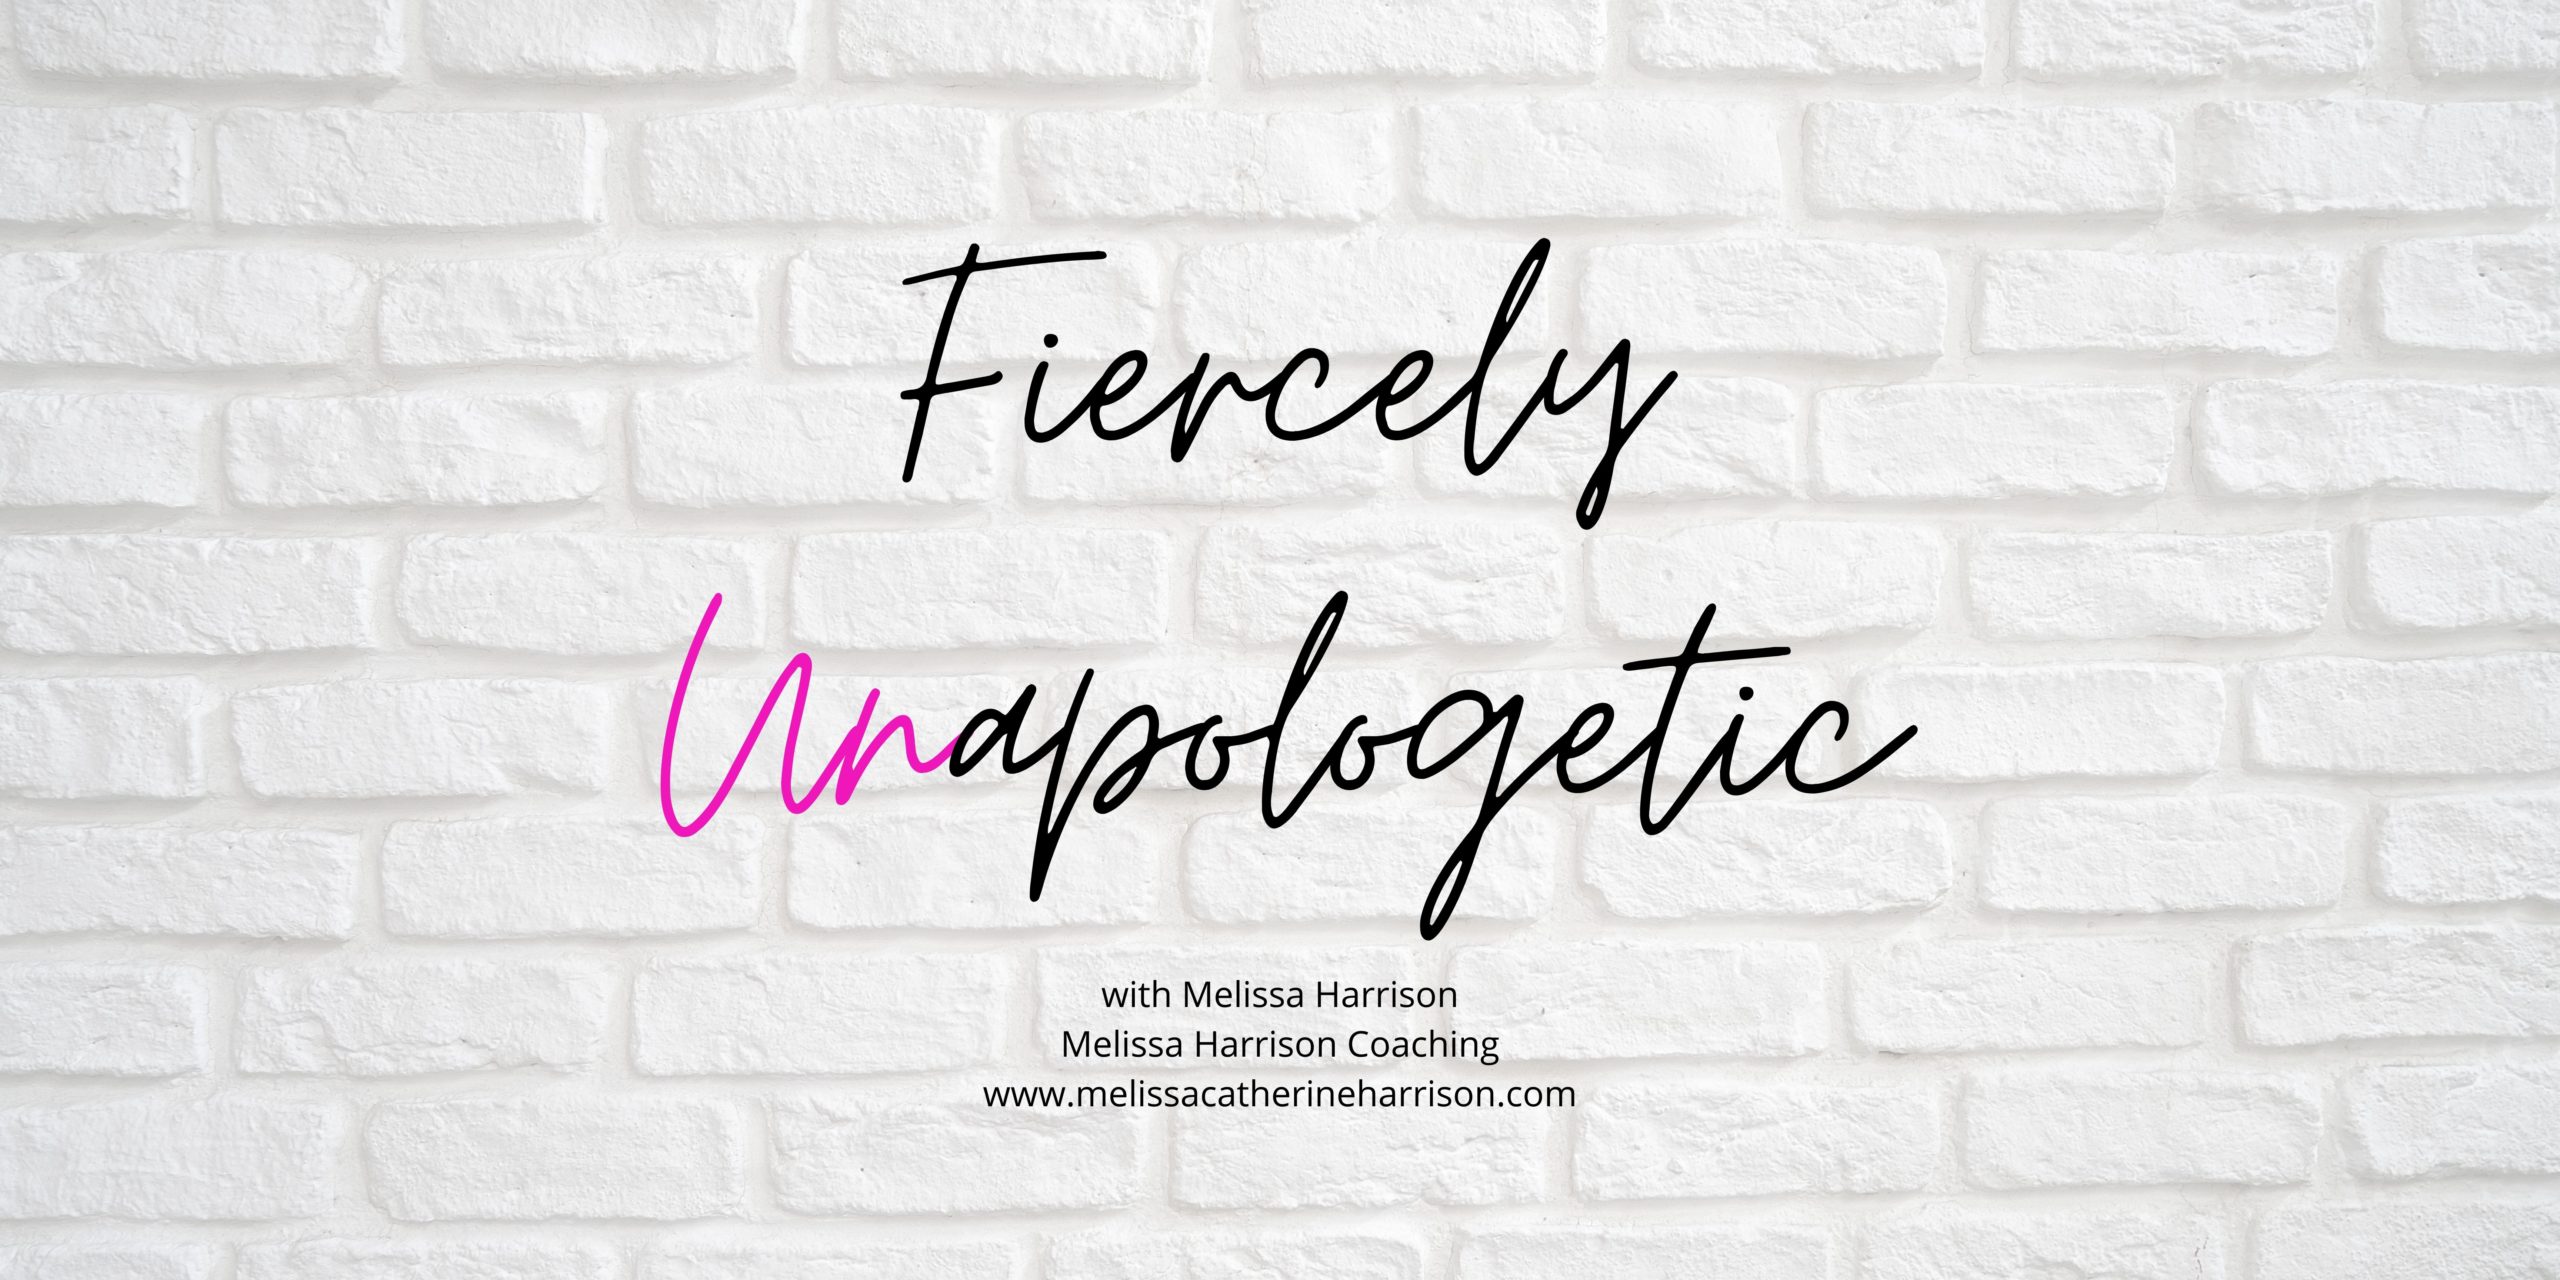 Fiercely Unapologetic  Melissa Harrison Coaching